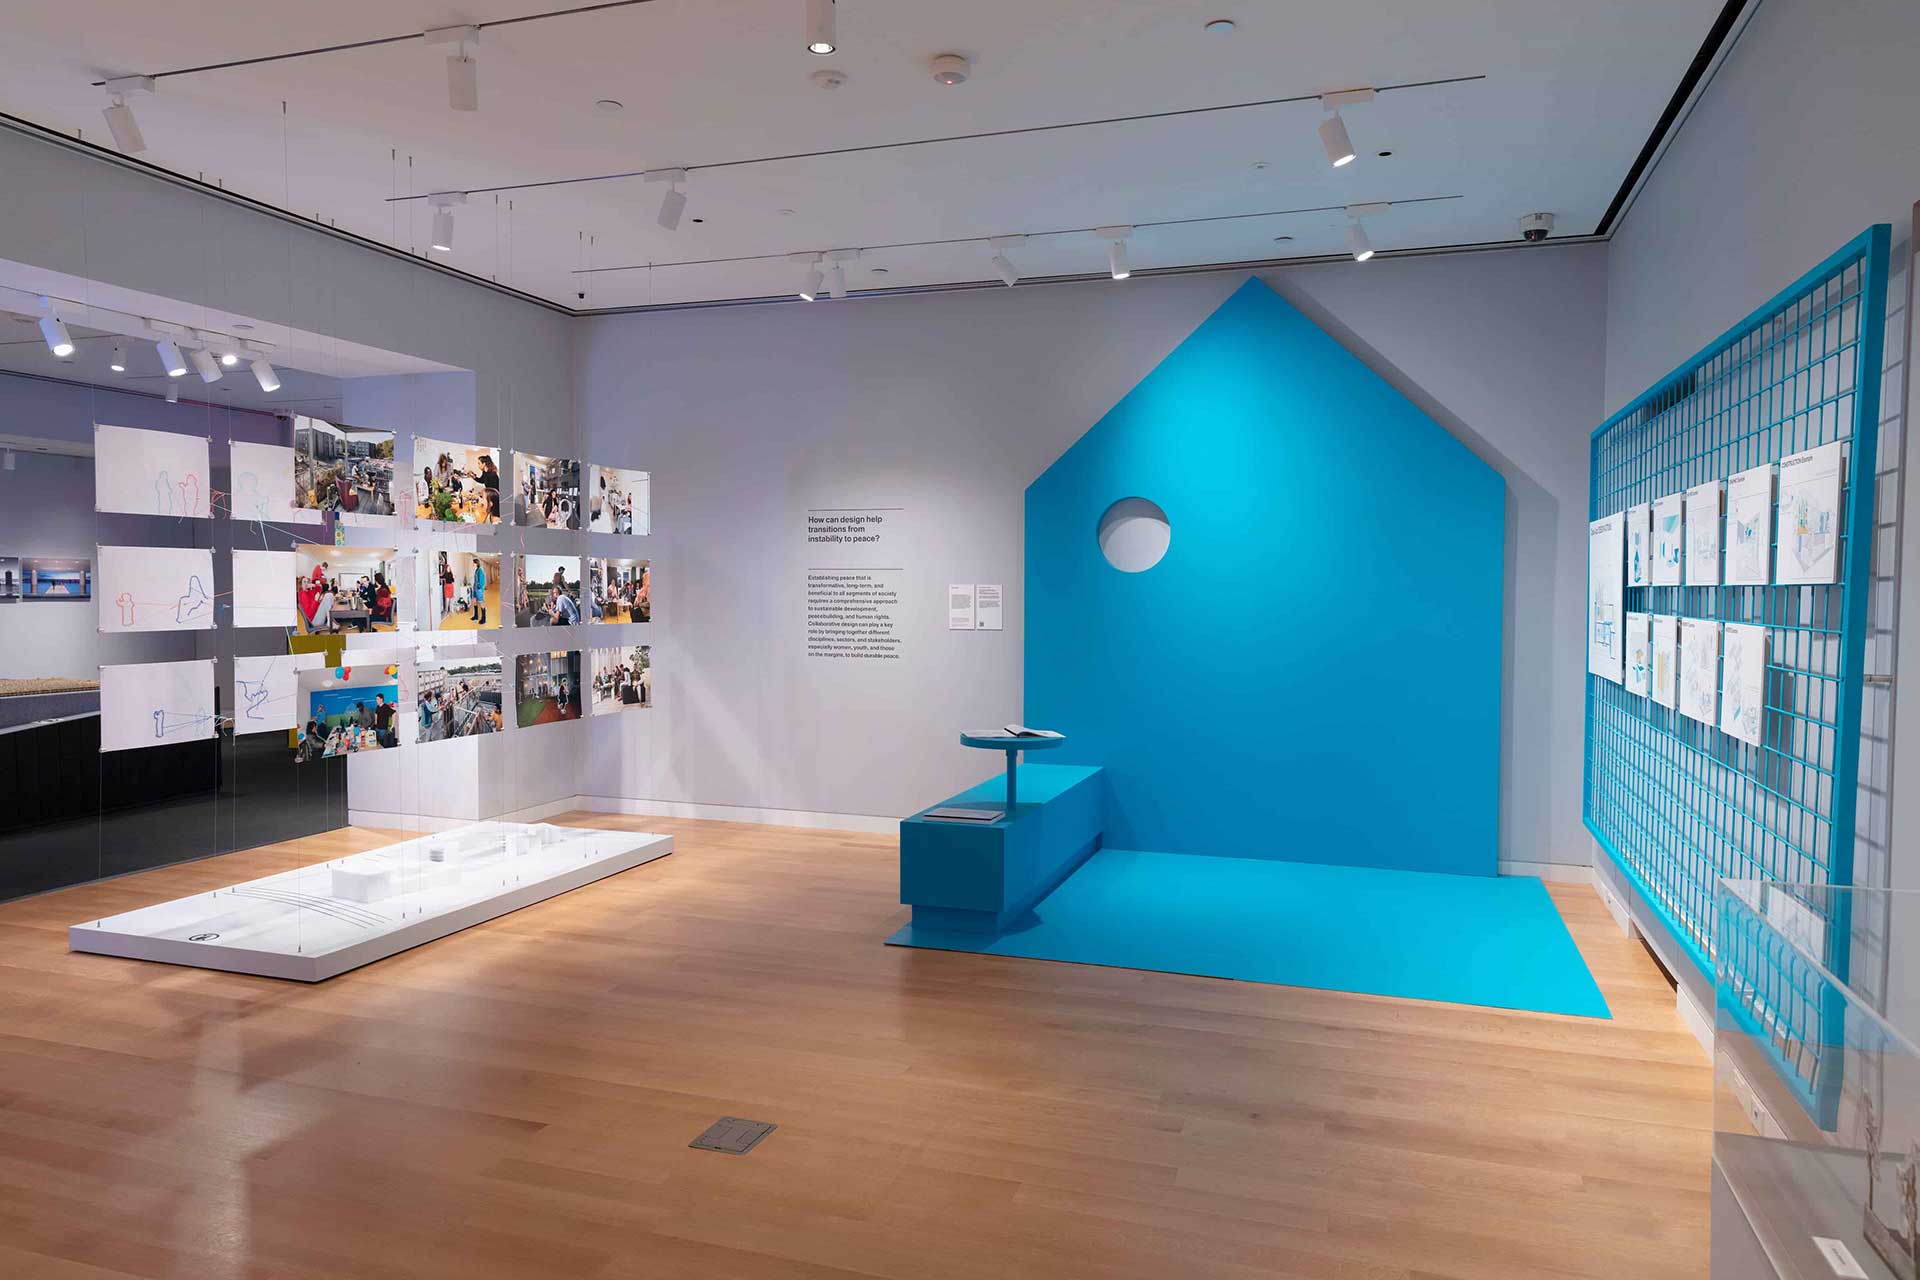 cooper-hewitt-walks-the-humanitarian-grounds-to-pursue-harmony-with-their-latest-exhibition-designing-peace